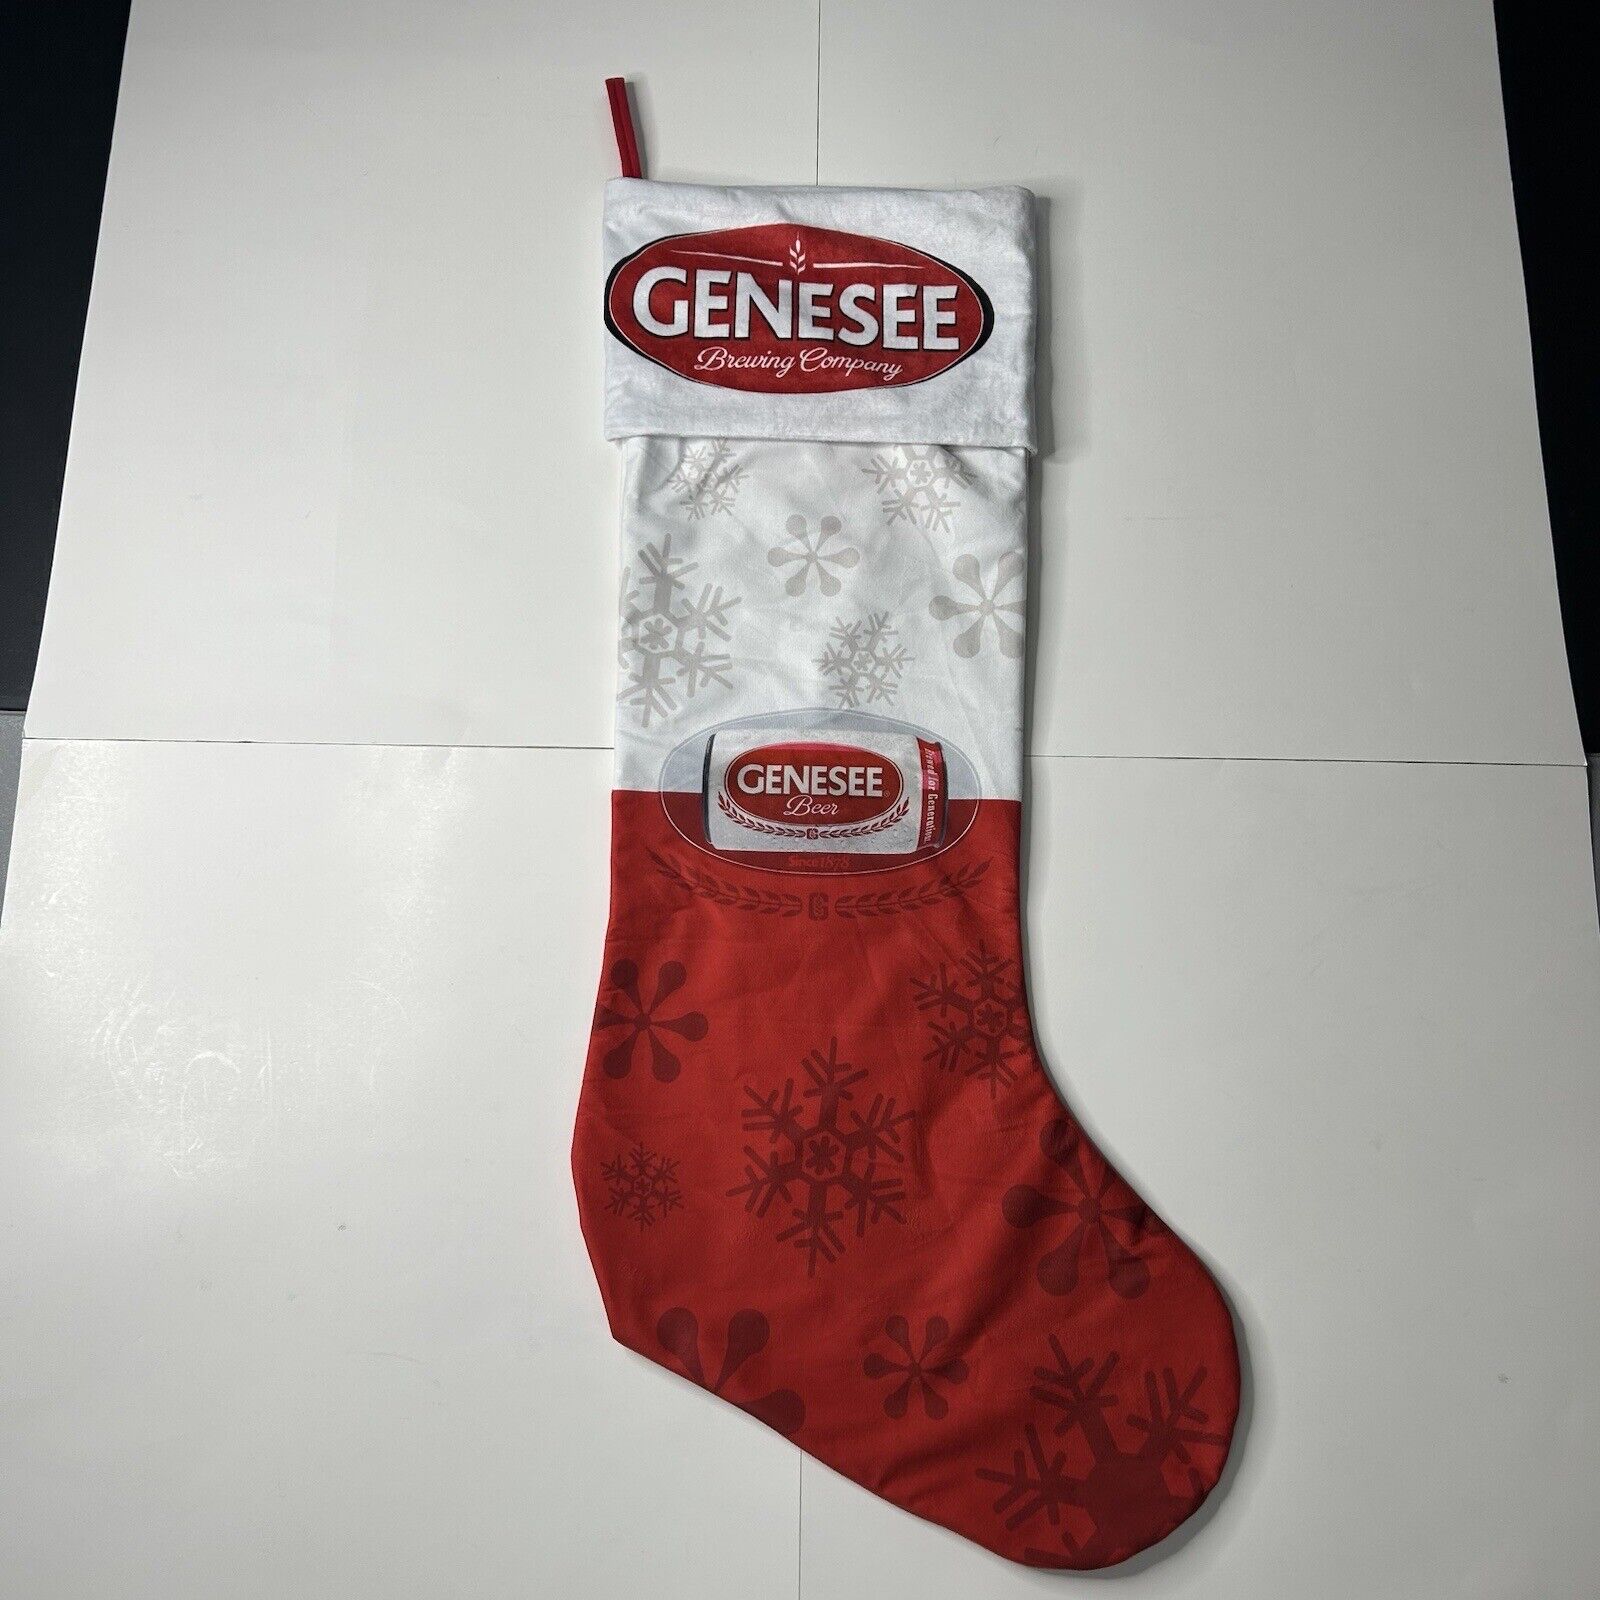 NEW Genesse Brewing Company Oversized Christmas Stocking 3 FT x 1 FT Holiday